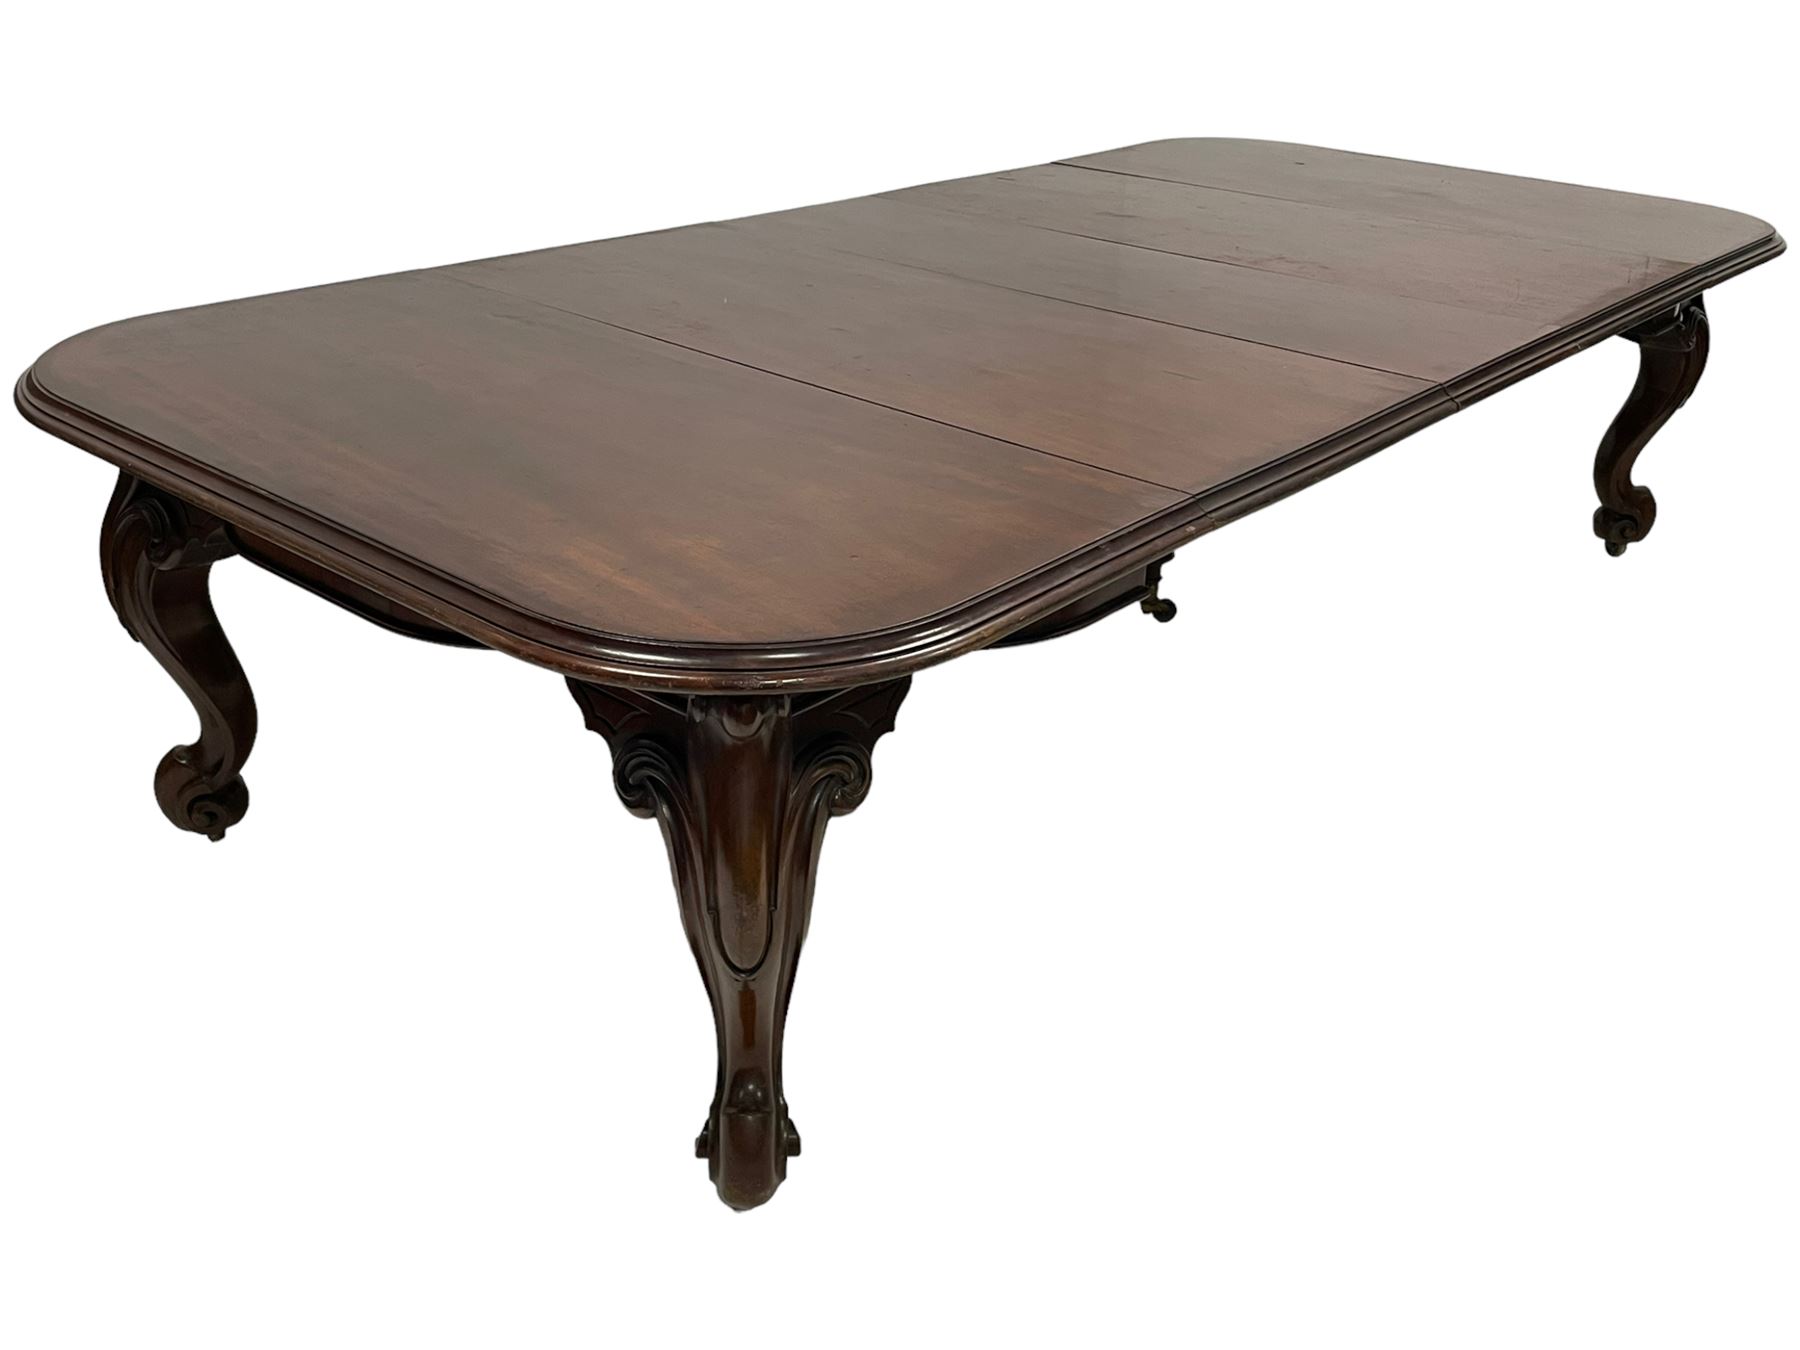 Large 19th century mahogany dining table - Image 12 of 30